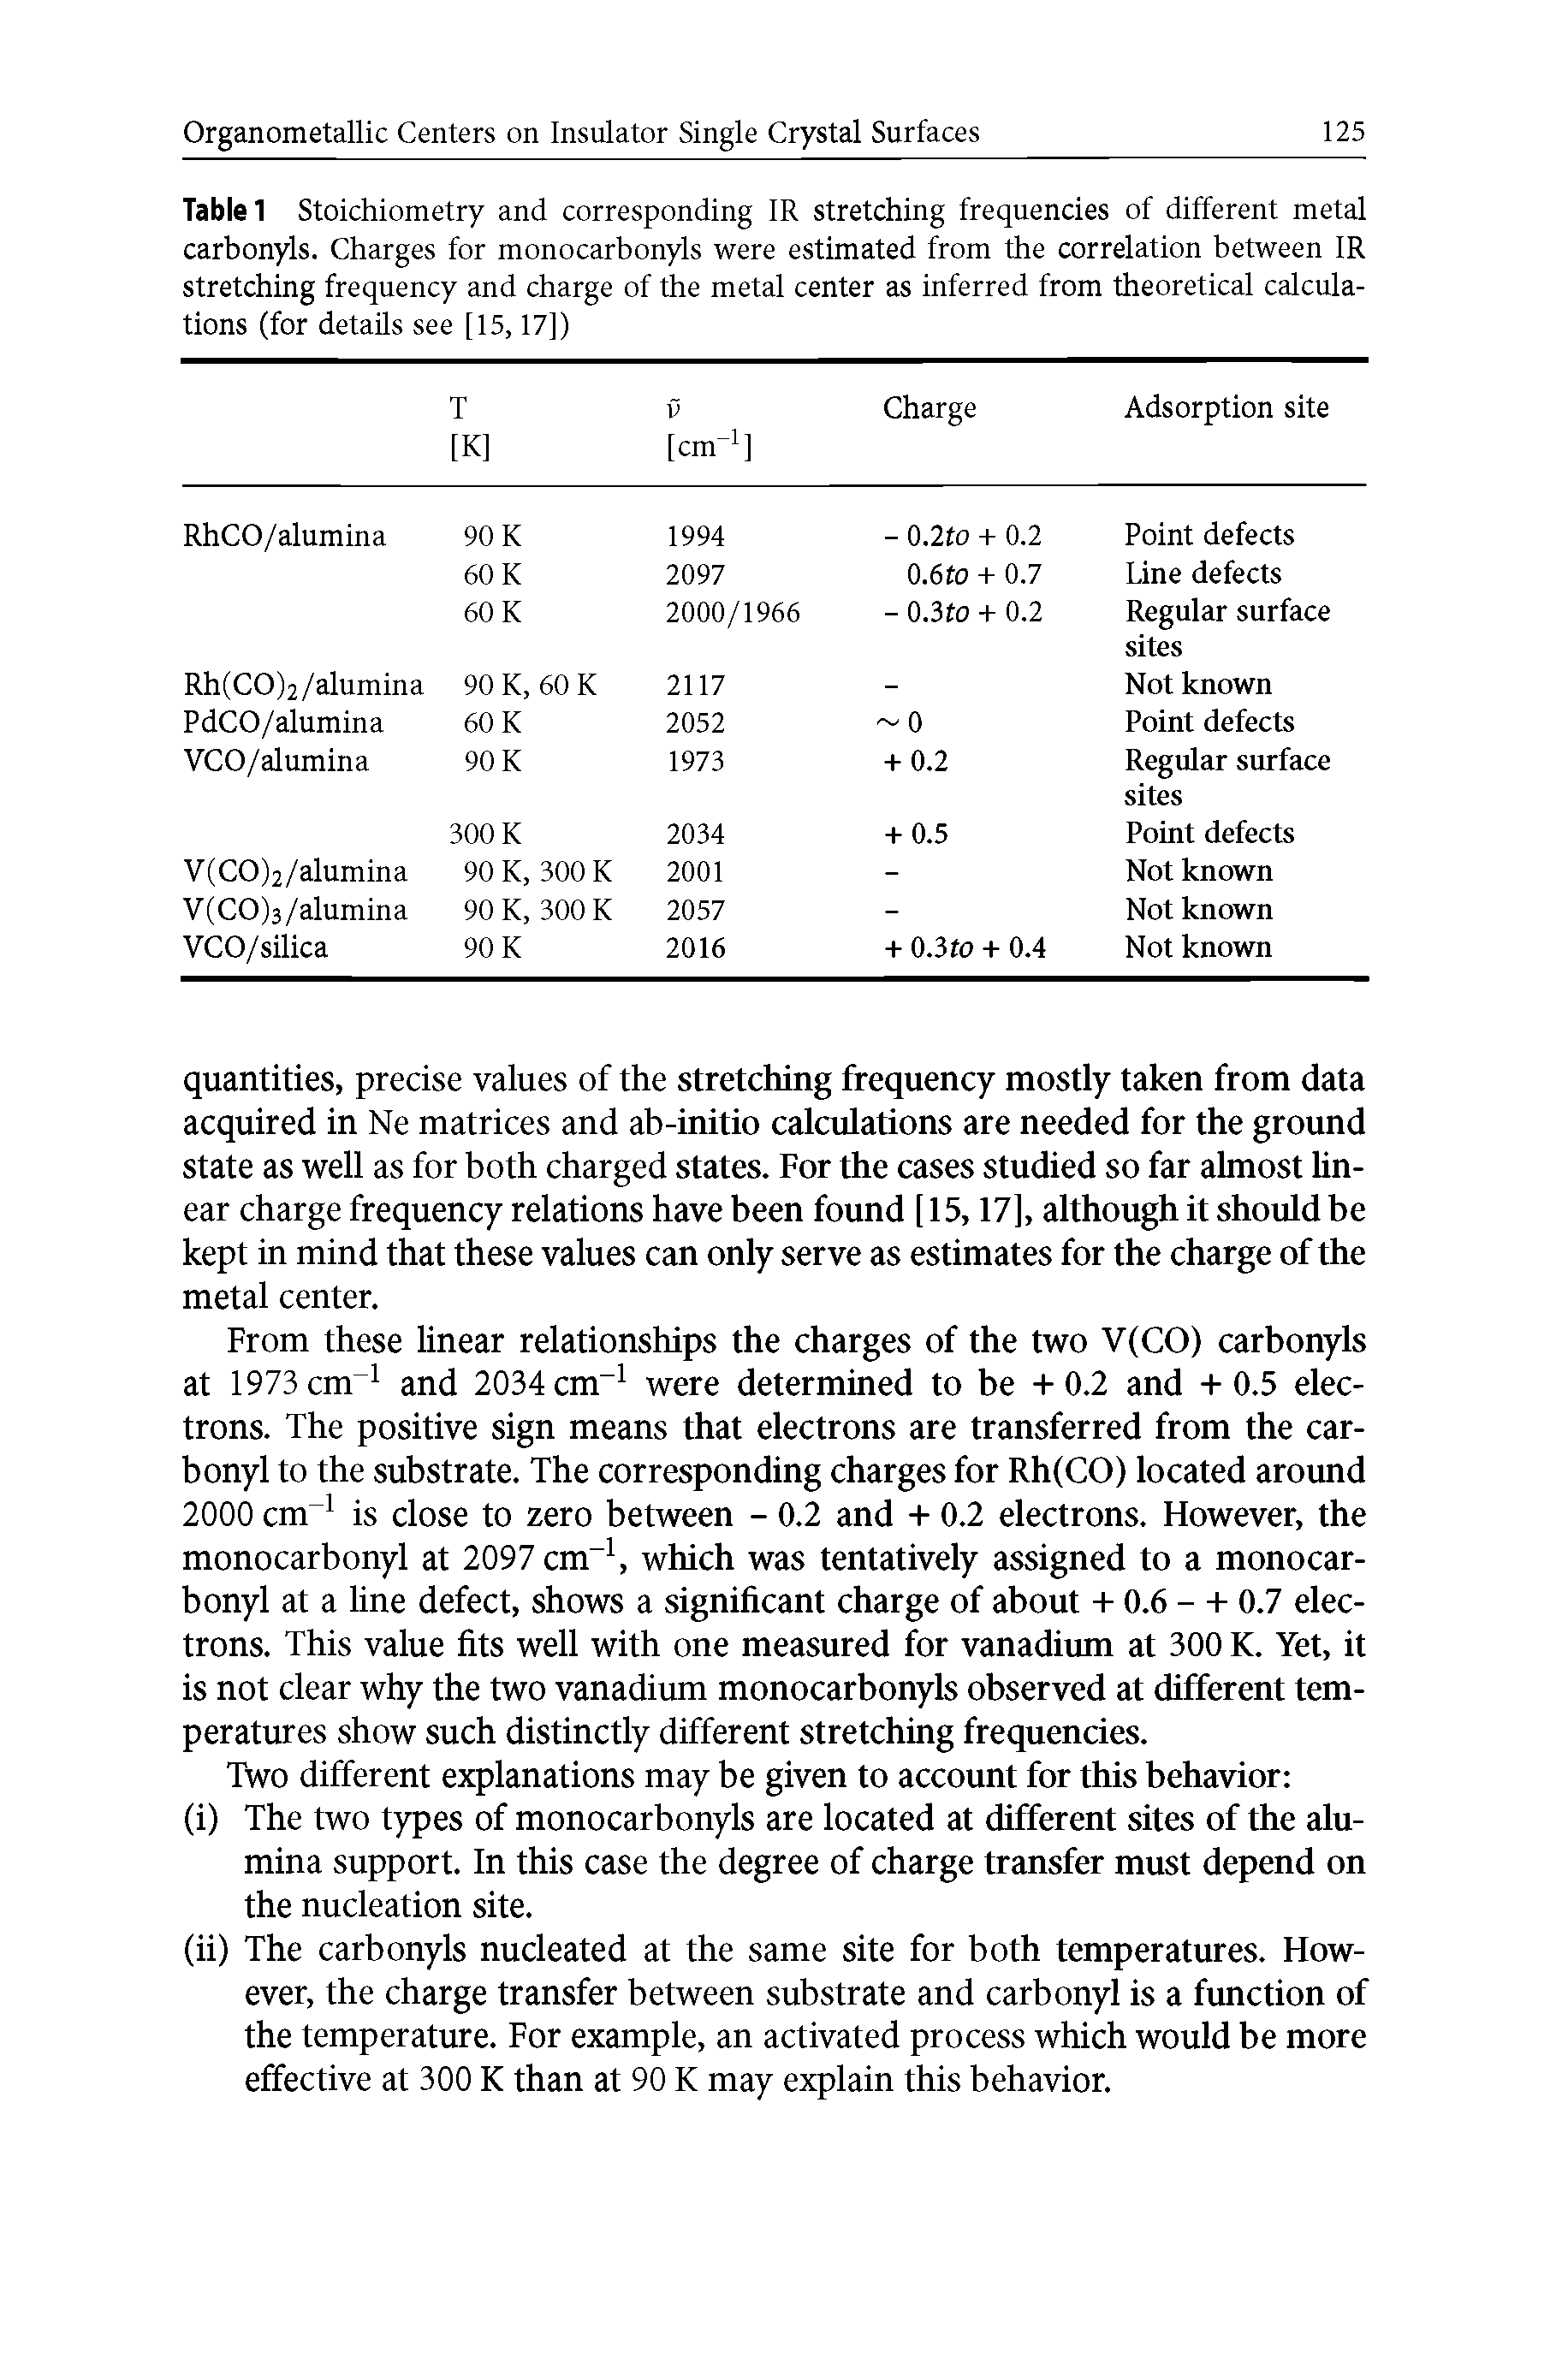 Table Stoichiometry and corresponding IR stretching frequencies of different metal carbonyls. Charges for monocarbonyls were estimated from the correlation between IR stretching frequency and charge of the metal center as inferred from theoretical calculations (for details see [15,17]) ...